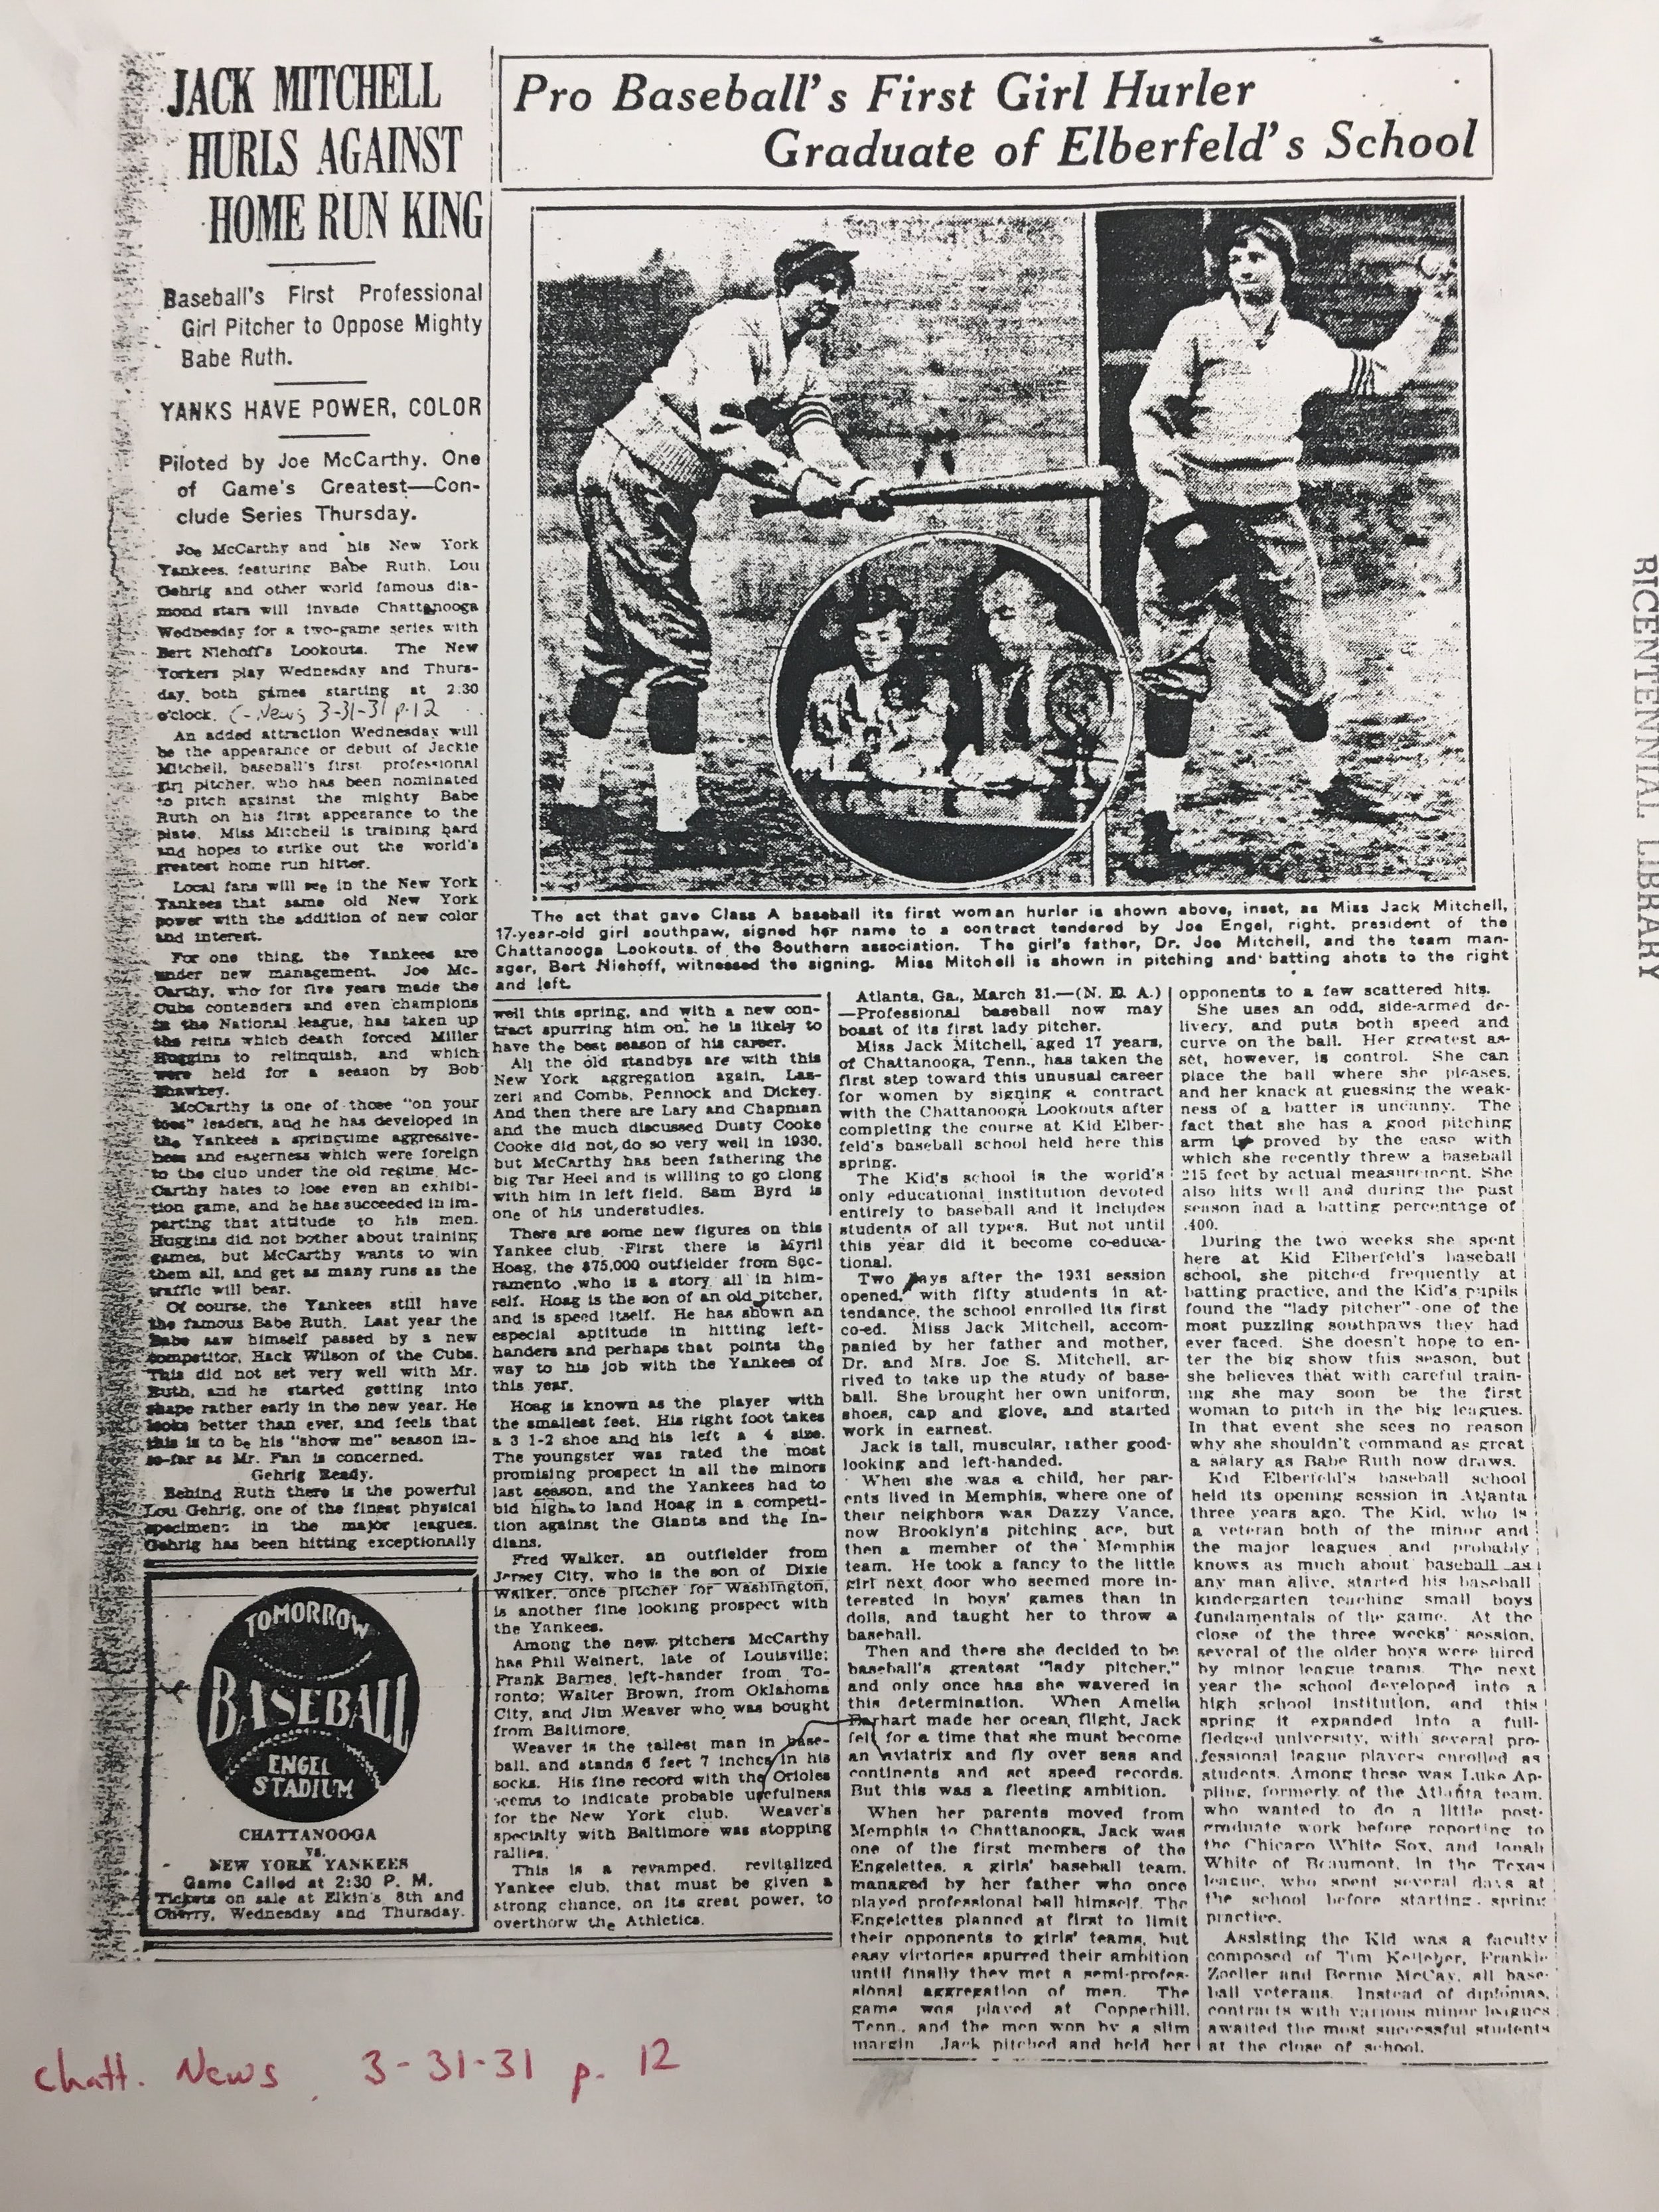   An article in the Chattanooga News builds hype for the exhibition game before Jackie Mitchell took the mound against Yankees. (Chattanooga Public Library archives)  